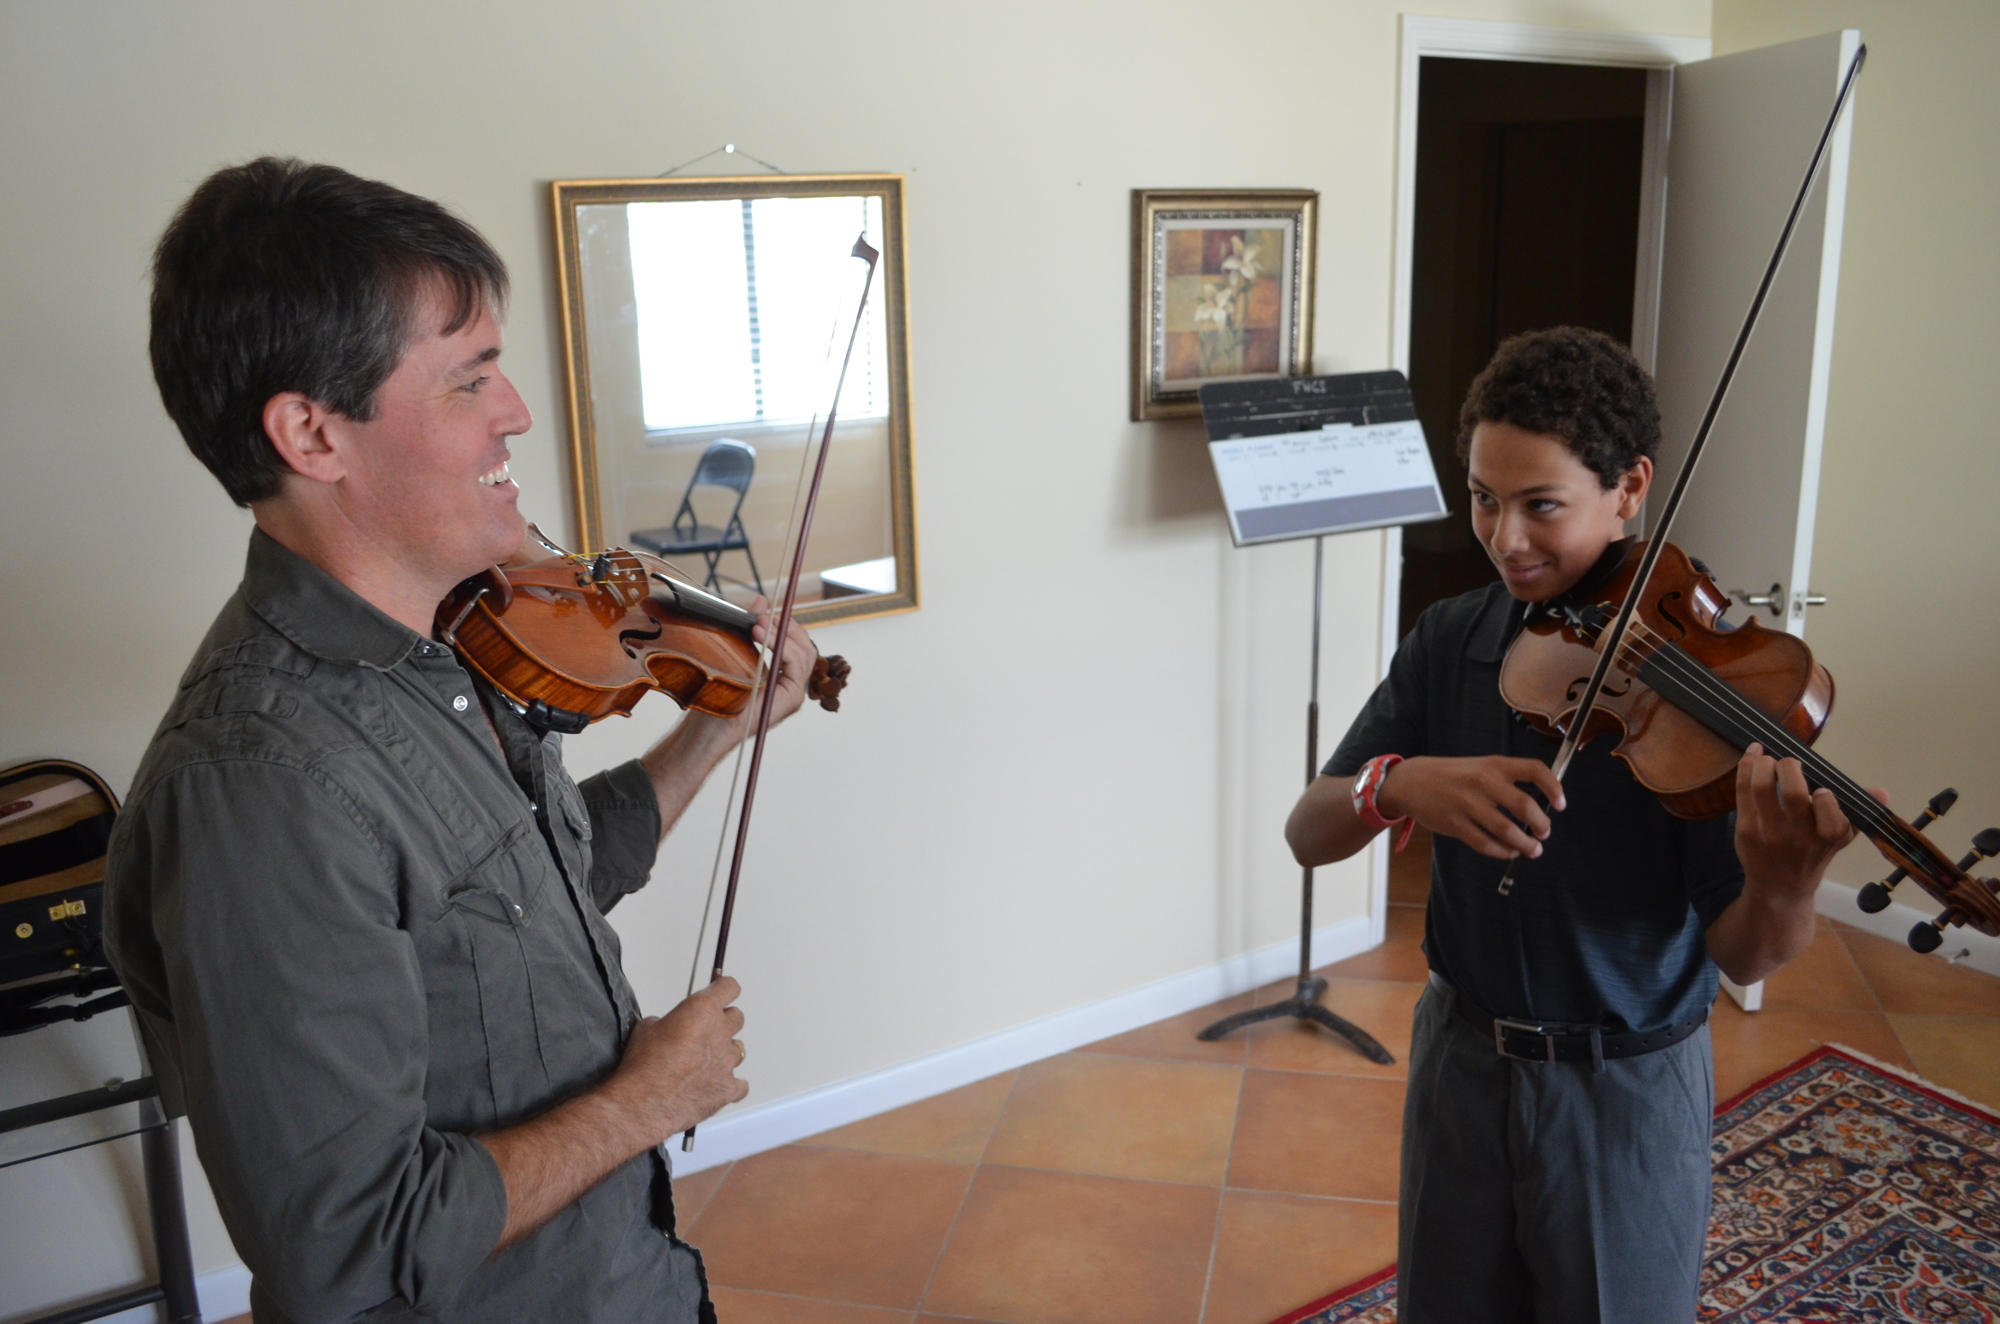 Sean O’Neil and Sarasota Music Conservatory student Giordano Scarano play during a lesson in the conservatory’s new space.